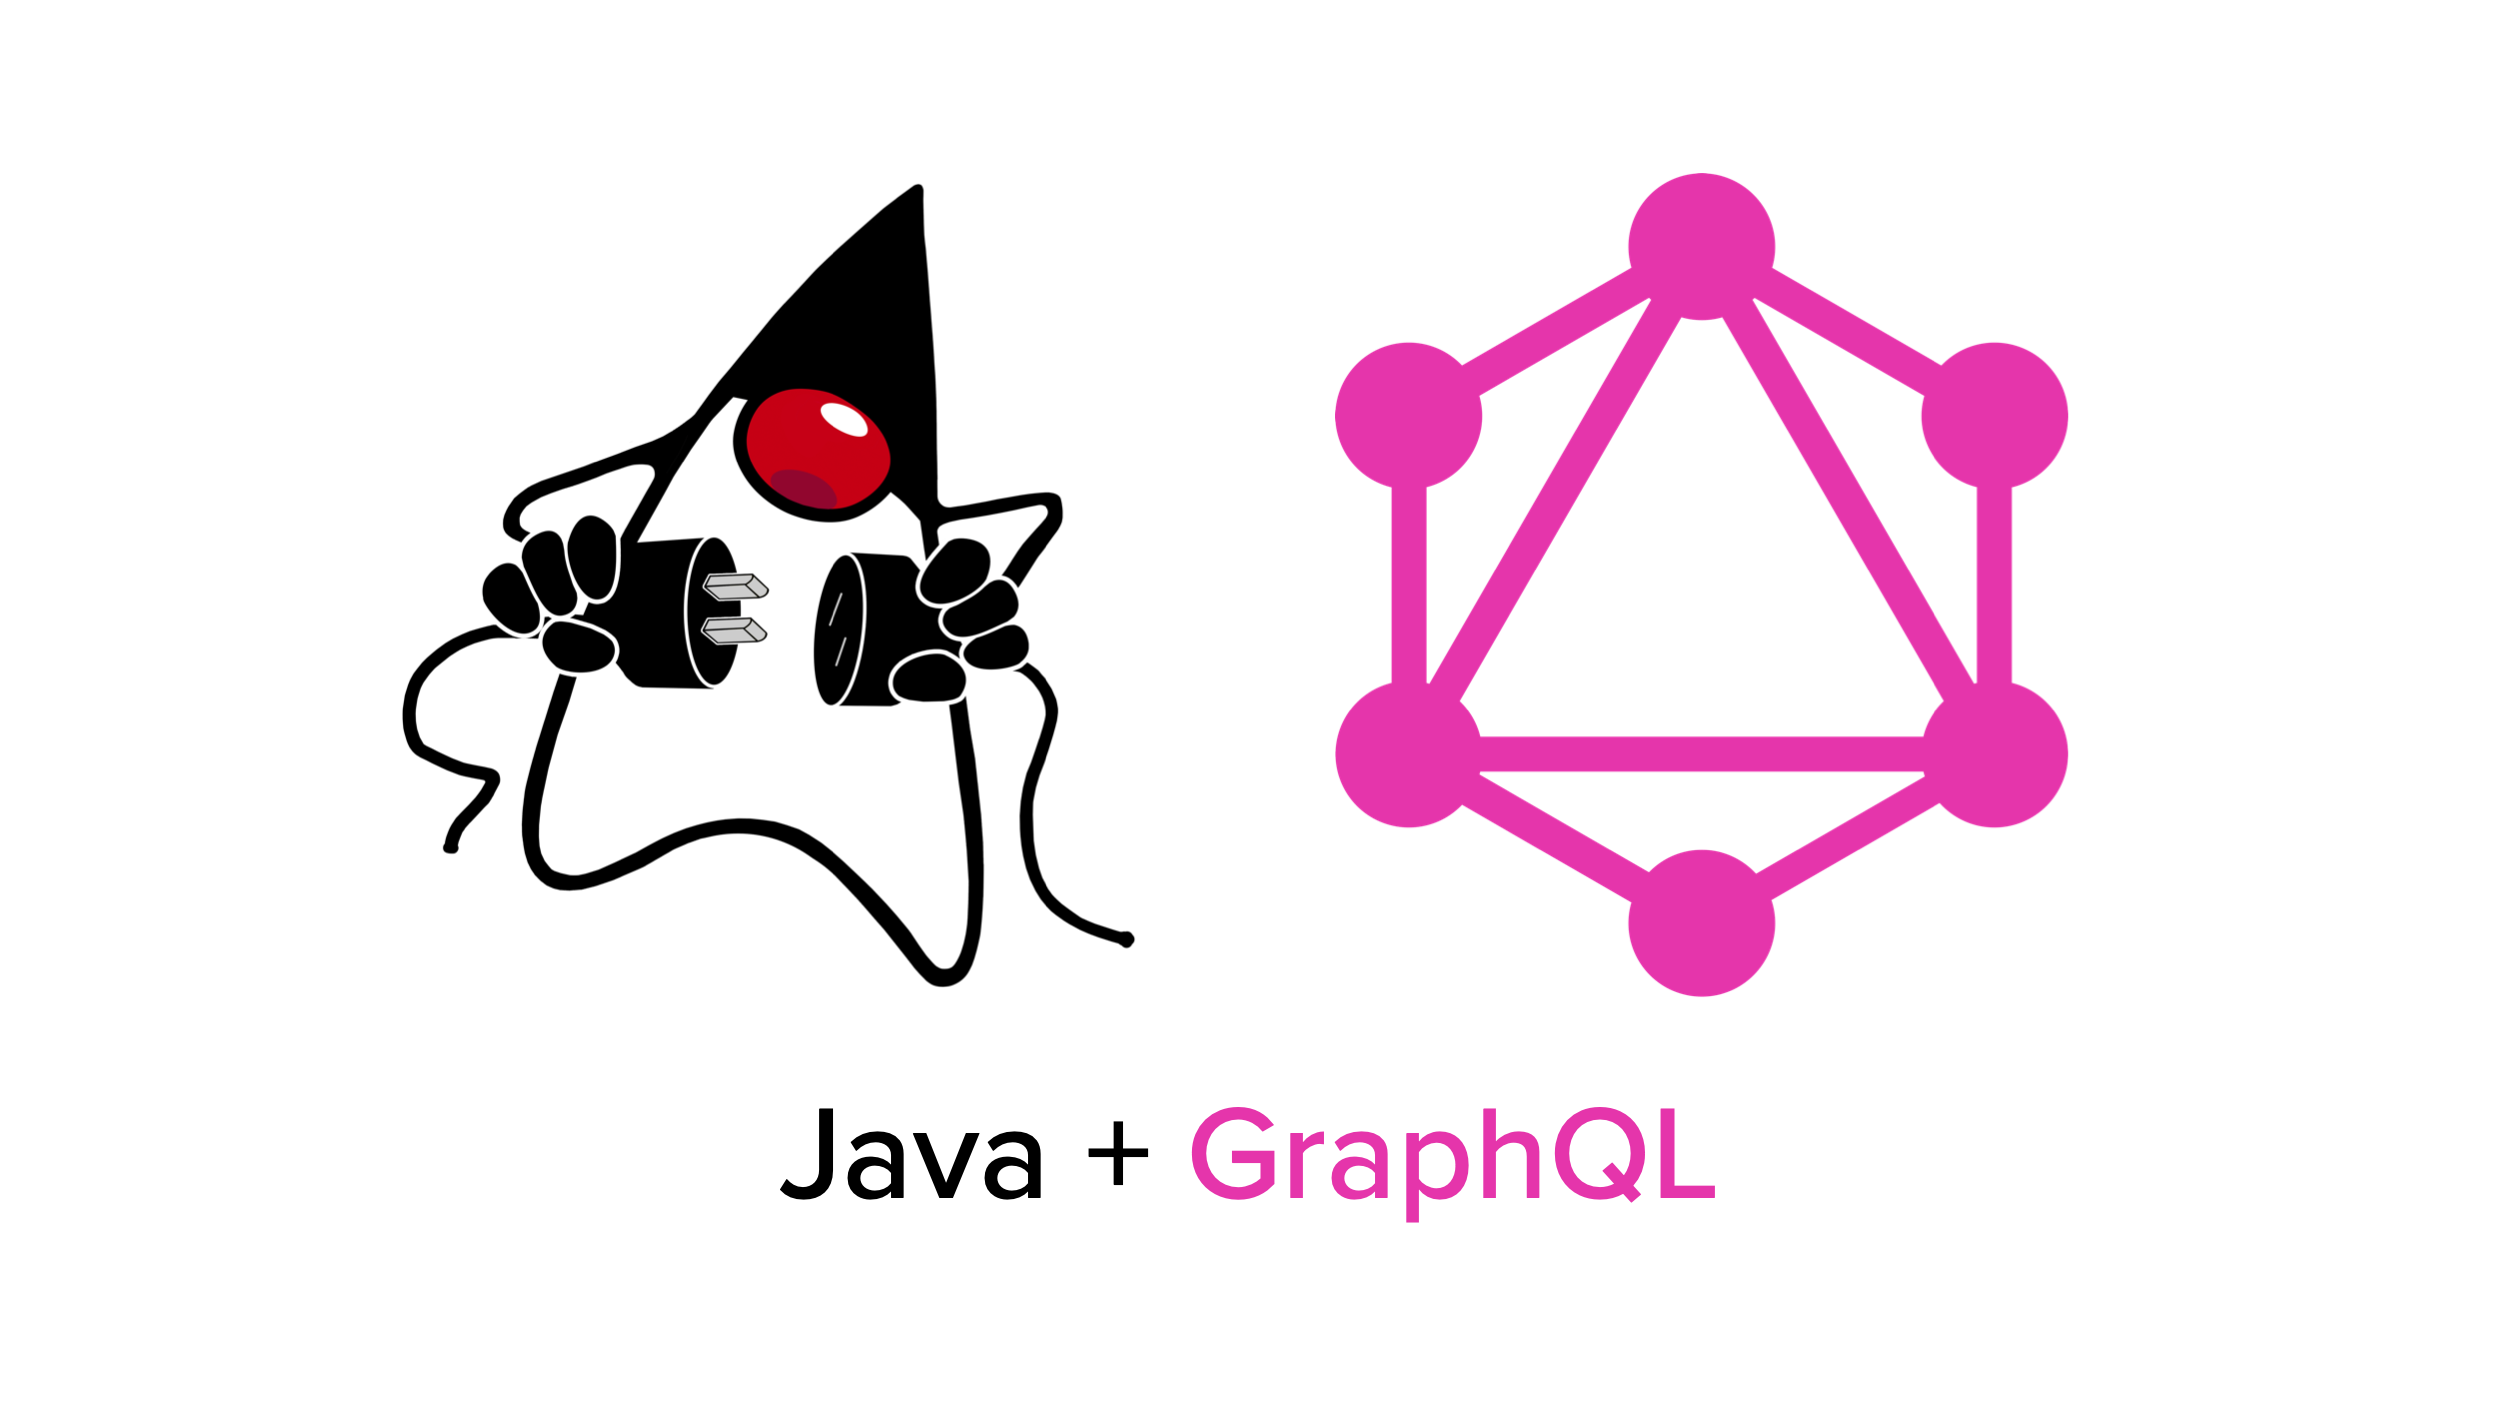 How to GraphQL in Java